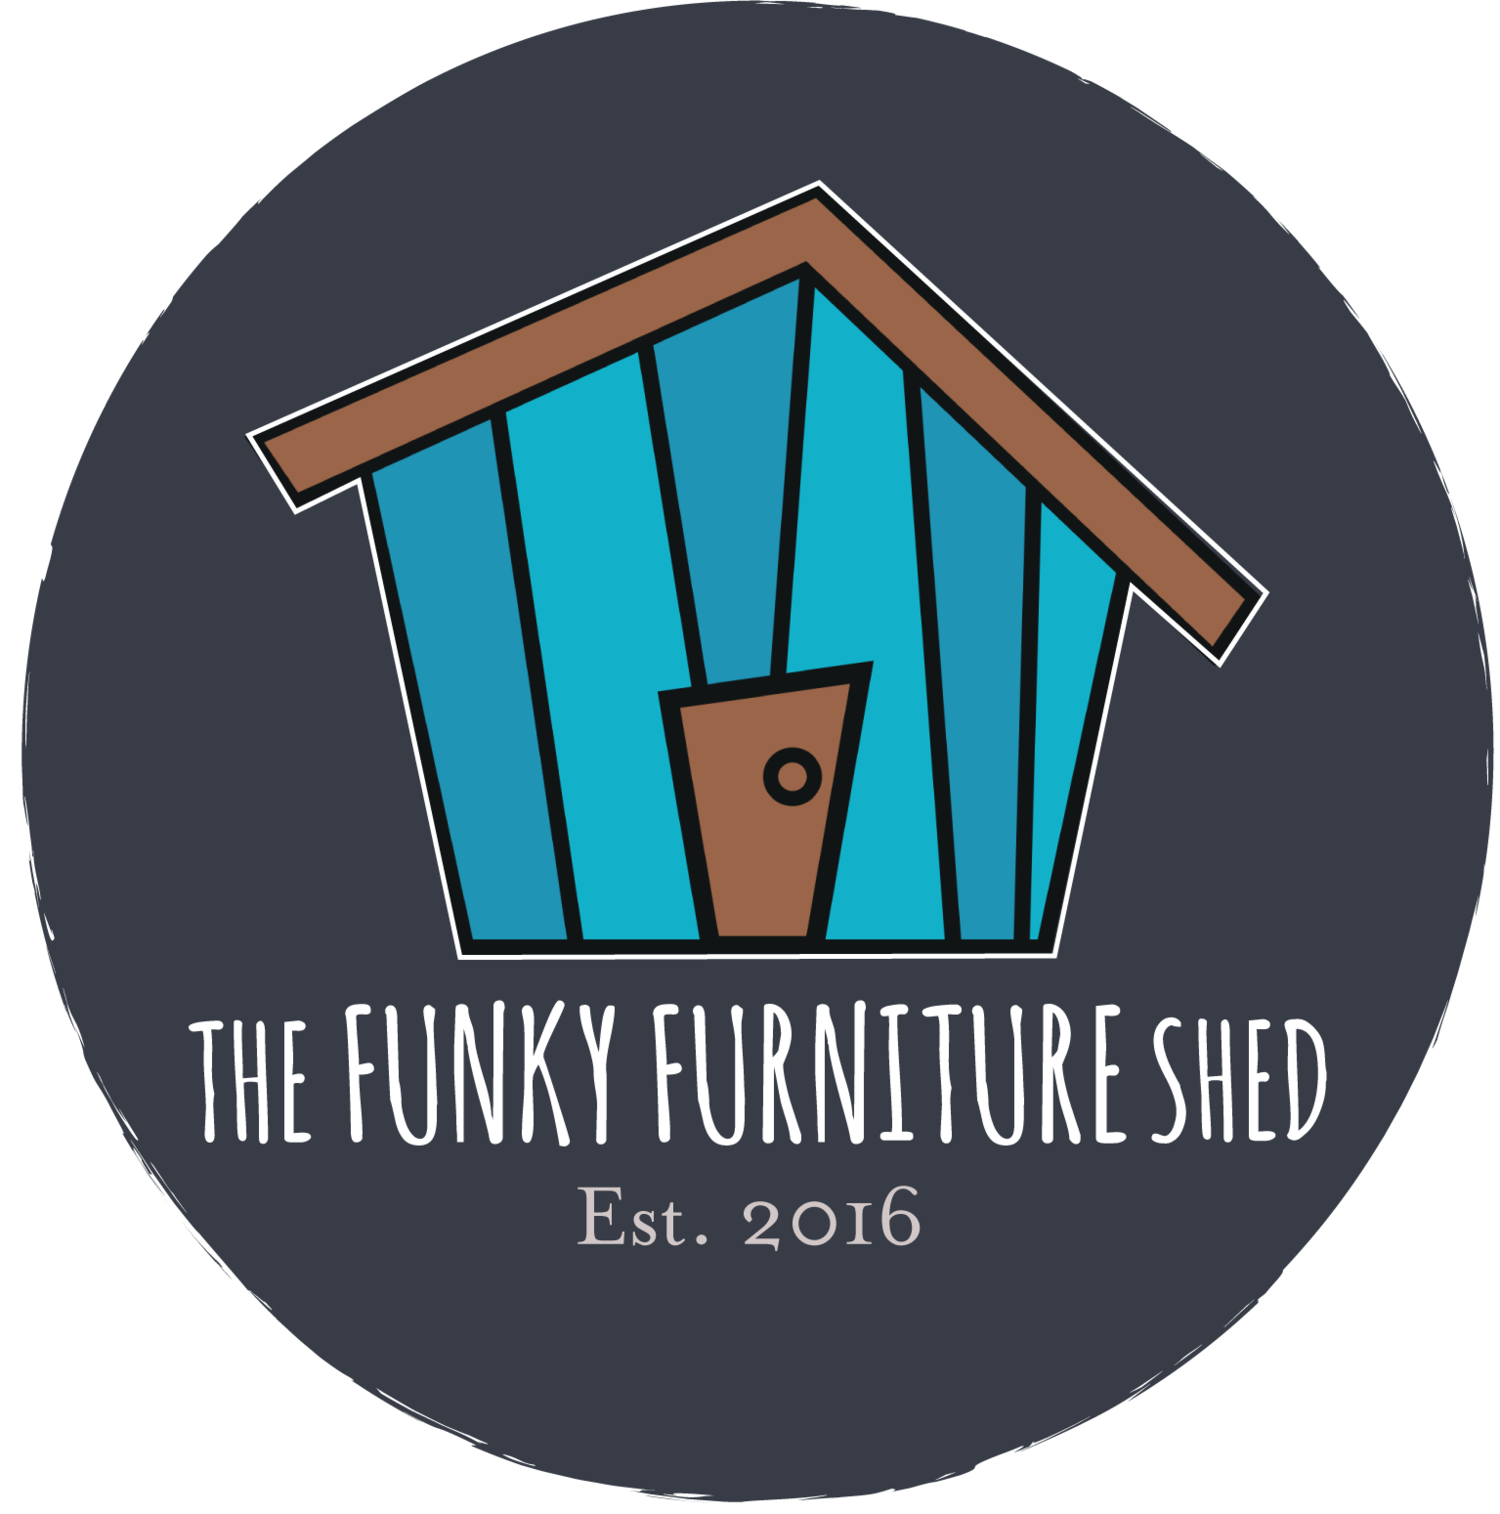 The Funky Furniture Shed